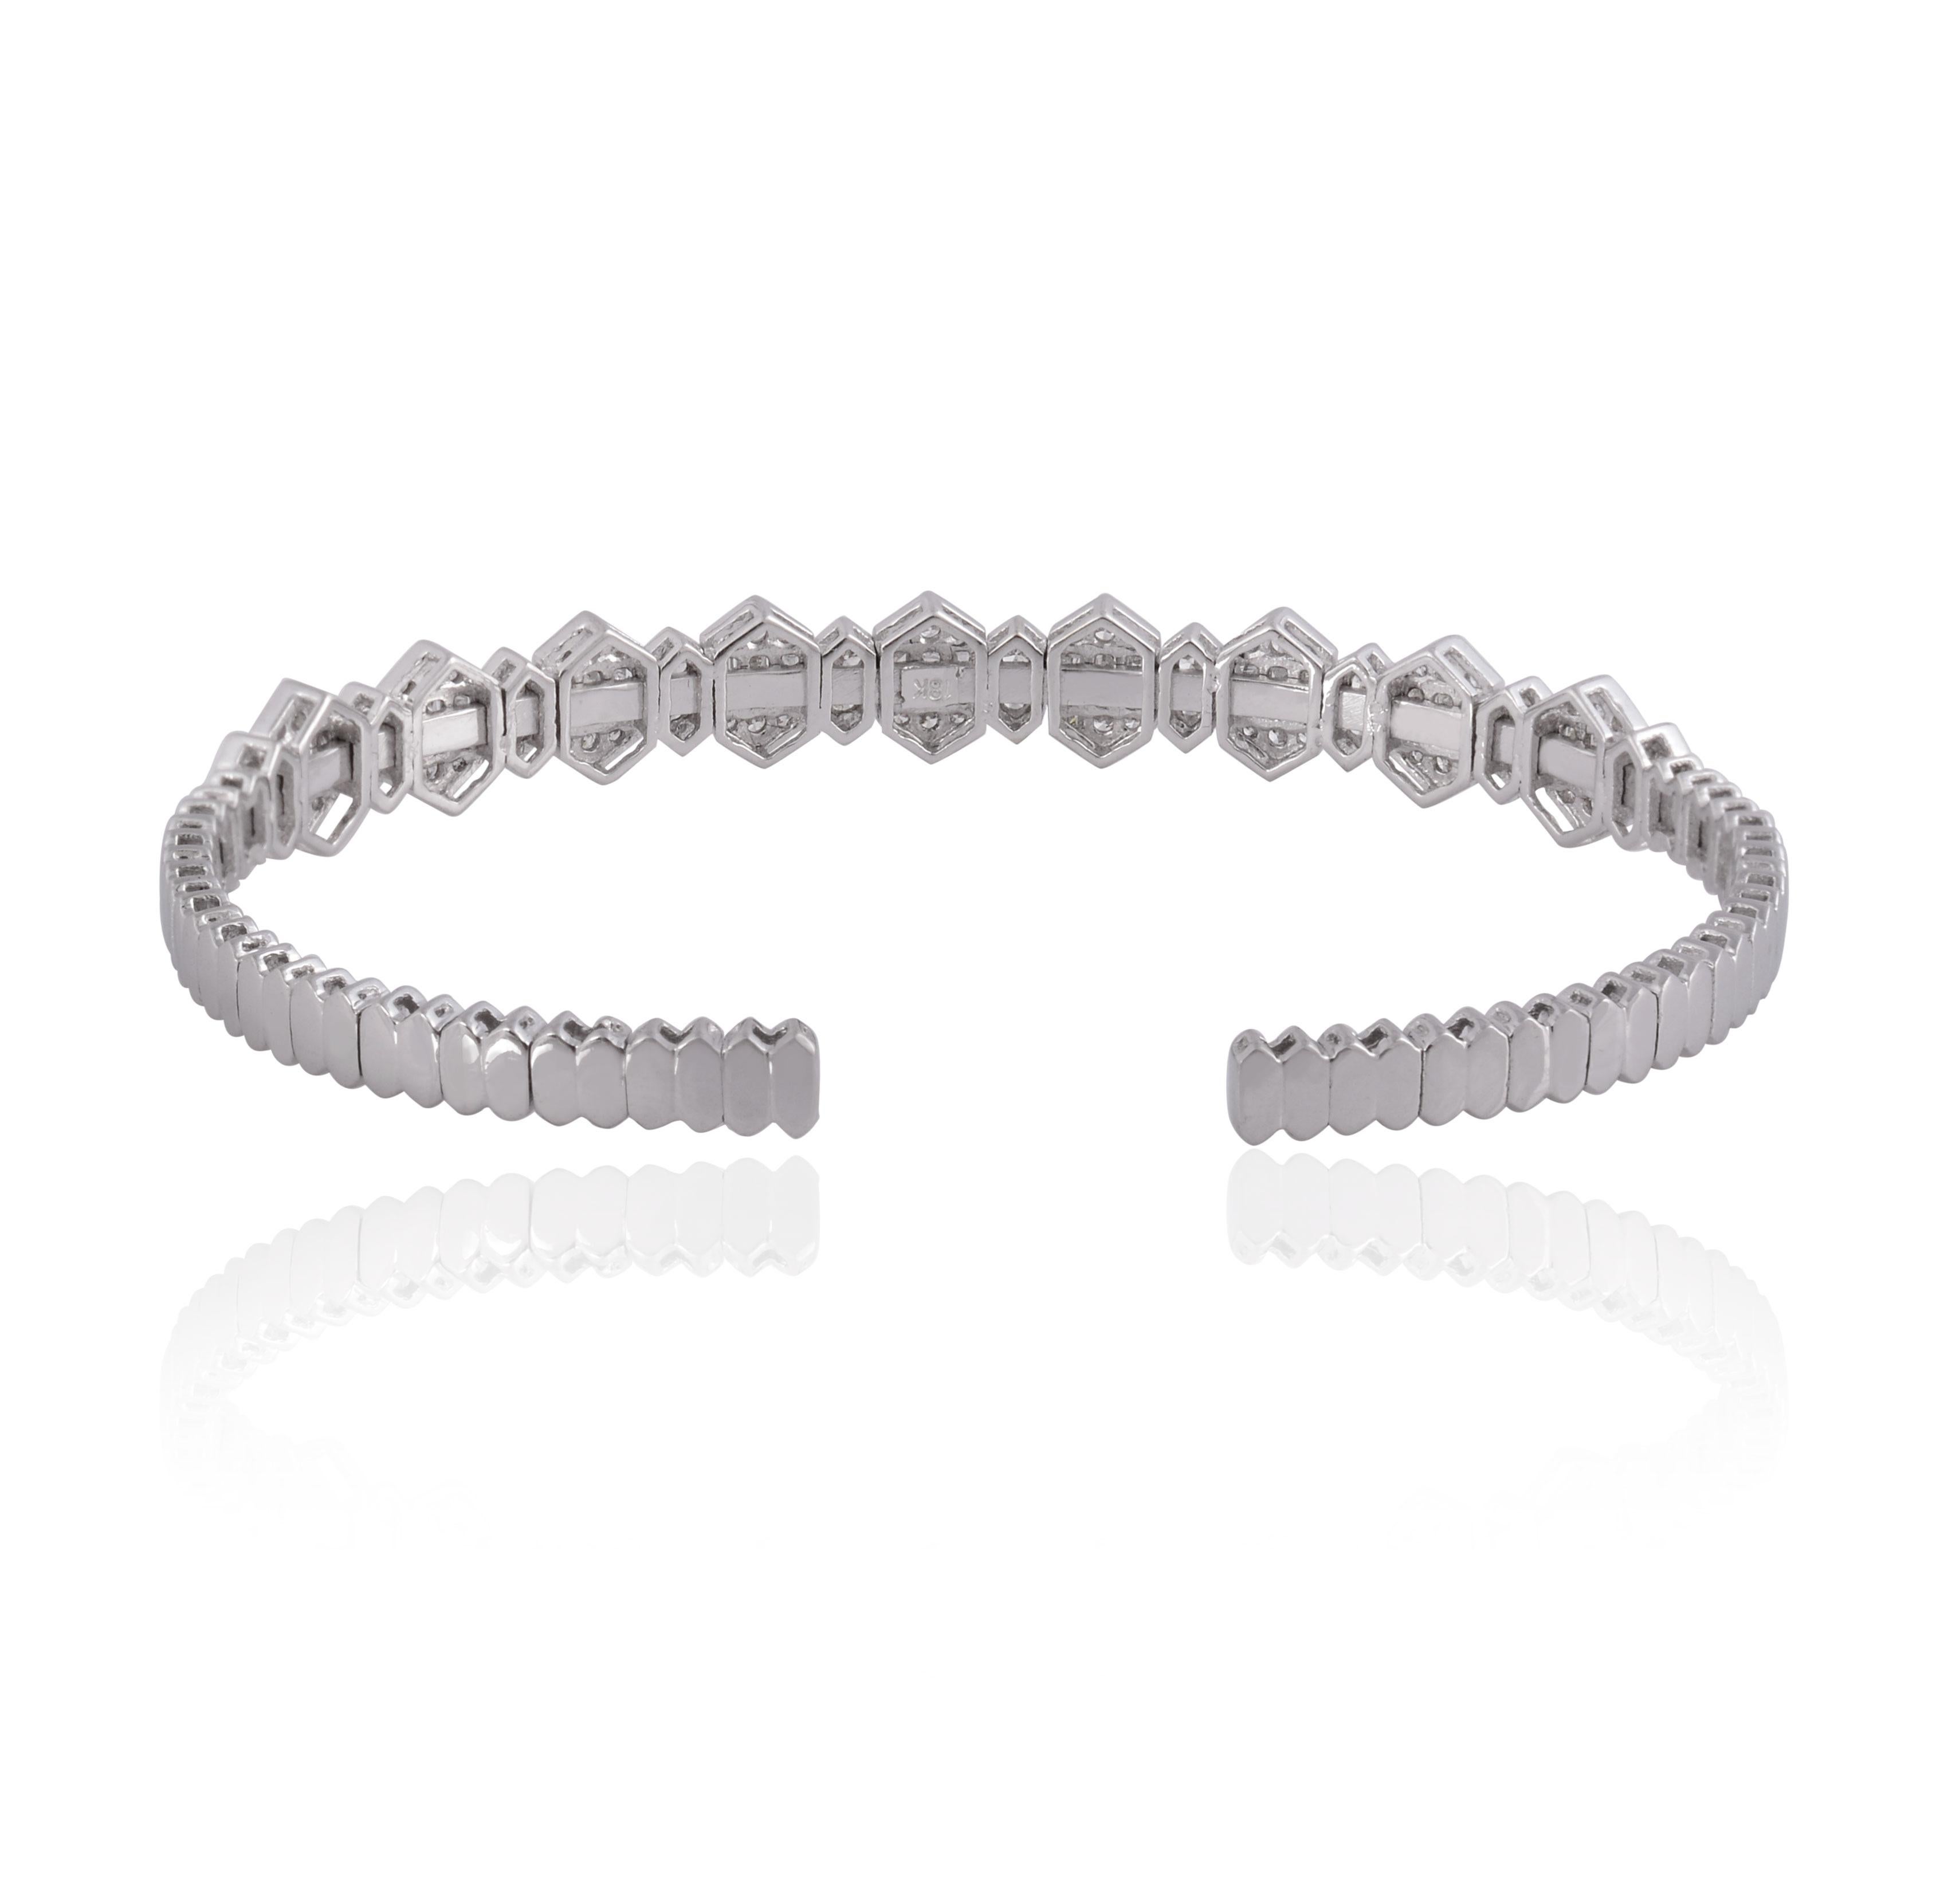 Step into the world of luxury with this captivating 2.15 Carat Baguette Diamond Cuff Bangle Bracelet, meticulously crafted in radiant 14 Karat White Gold. This exquisite piece of fine jewelry is a celebration of sophistication and grace, designed to